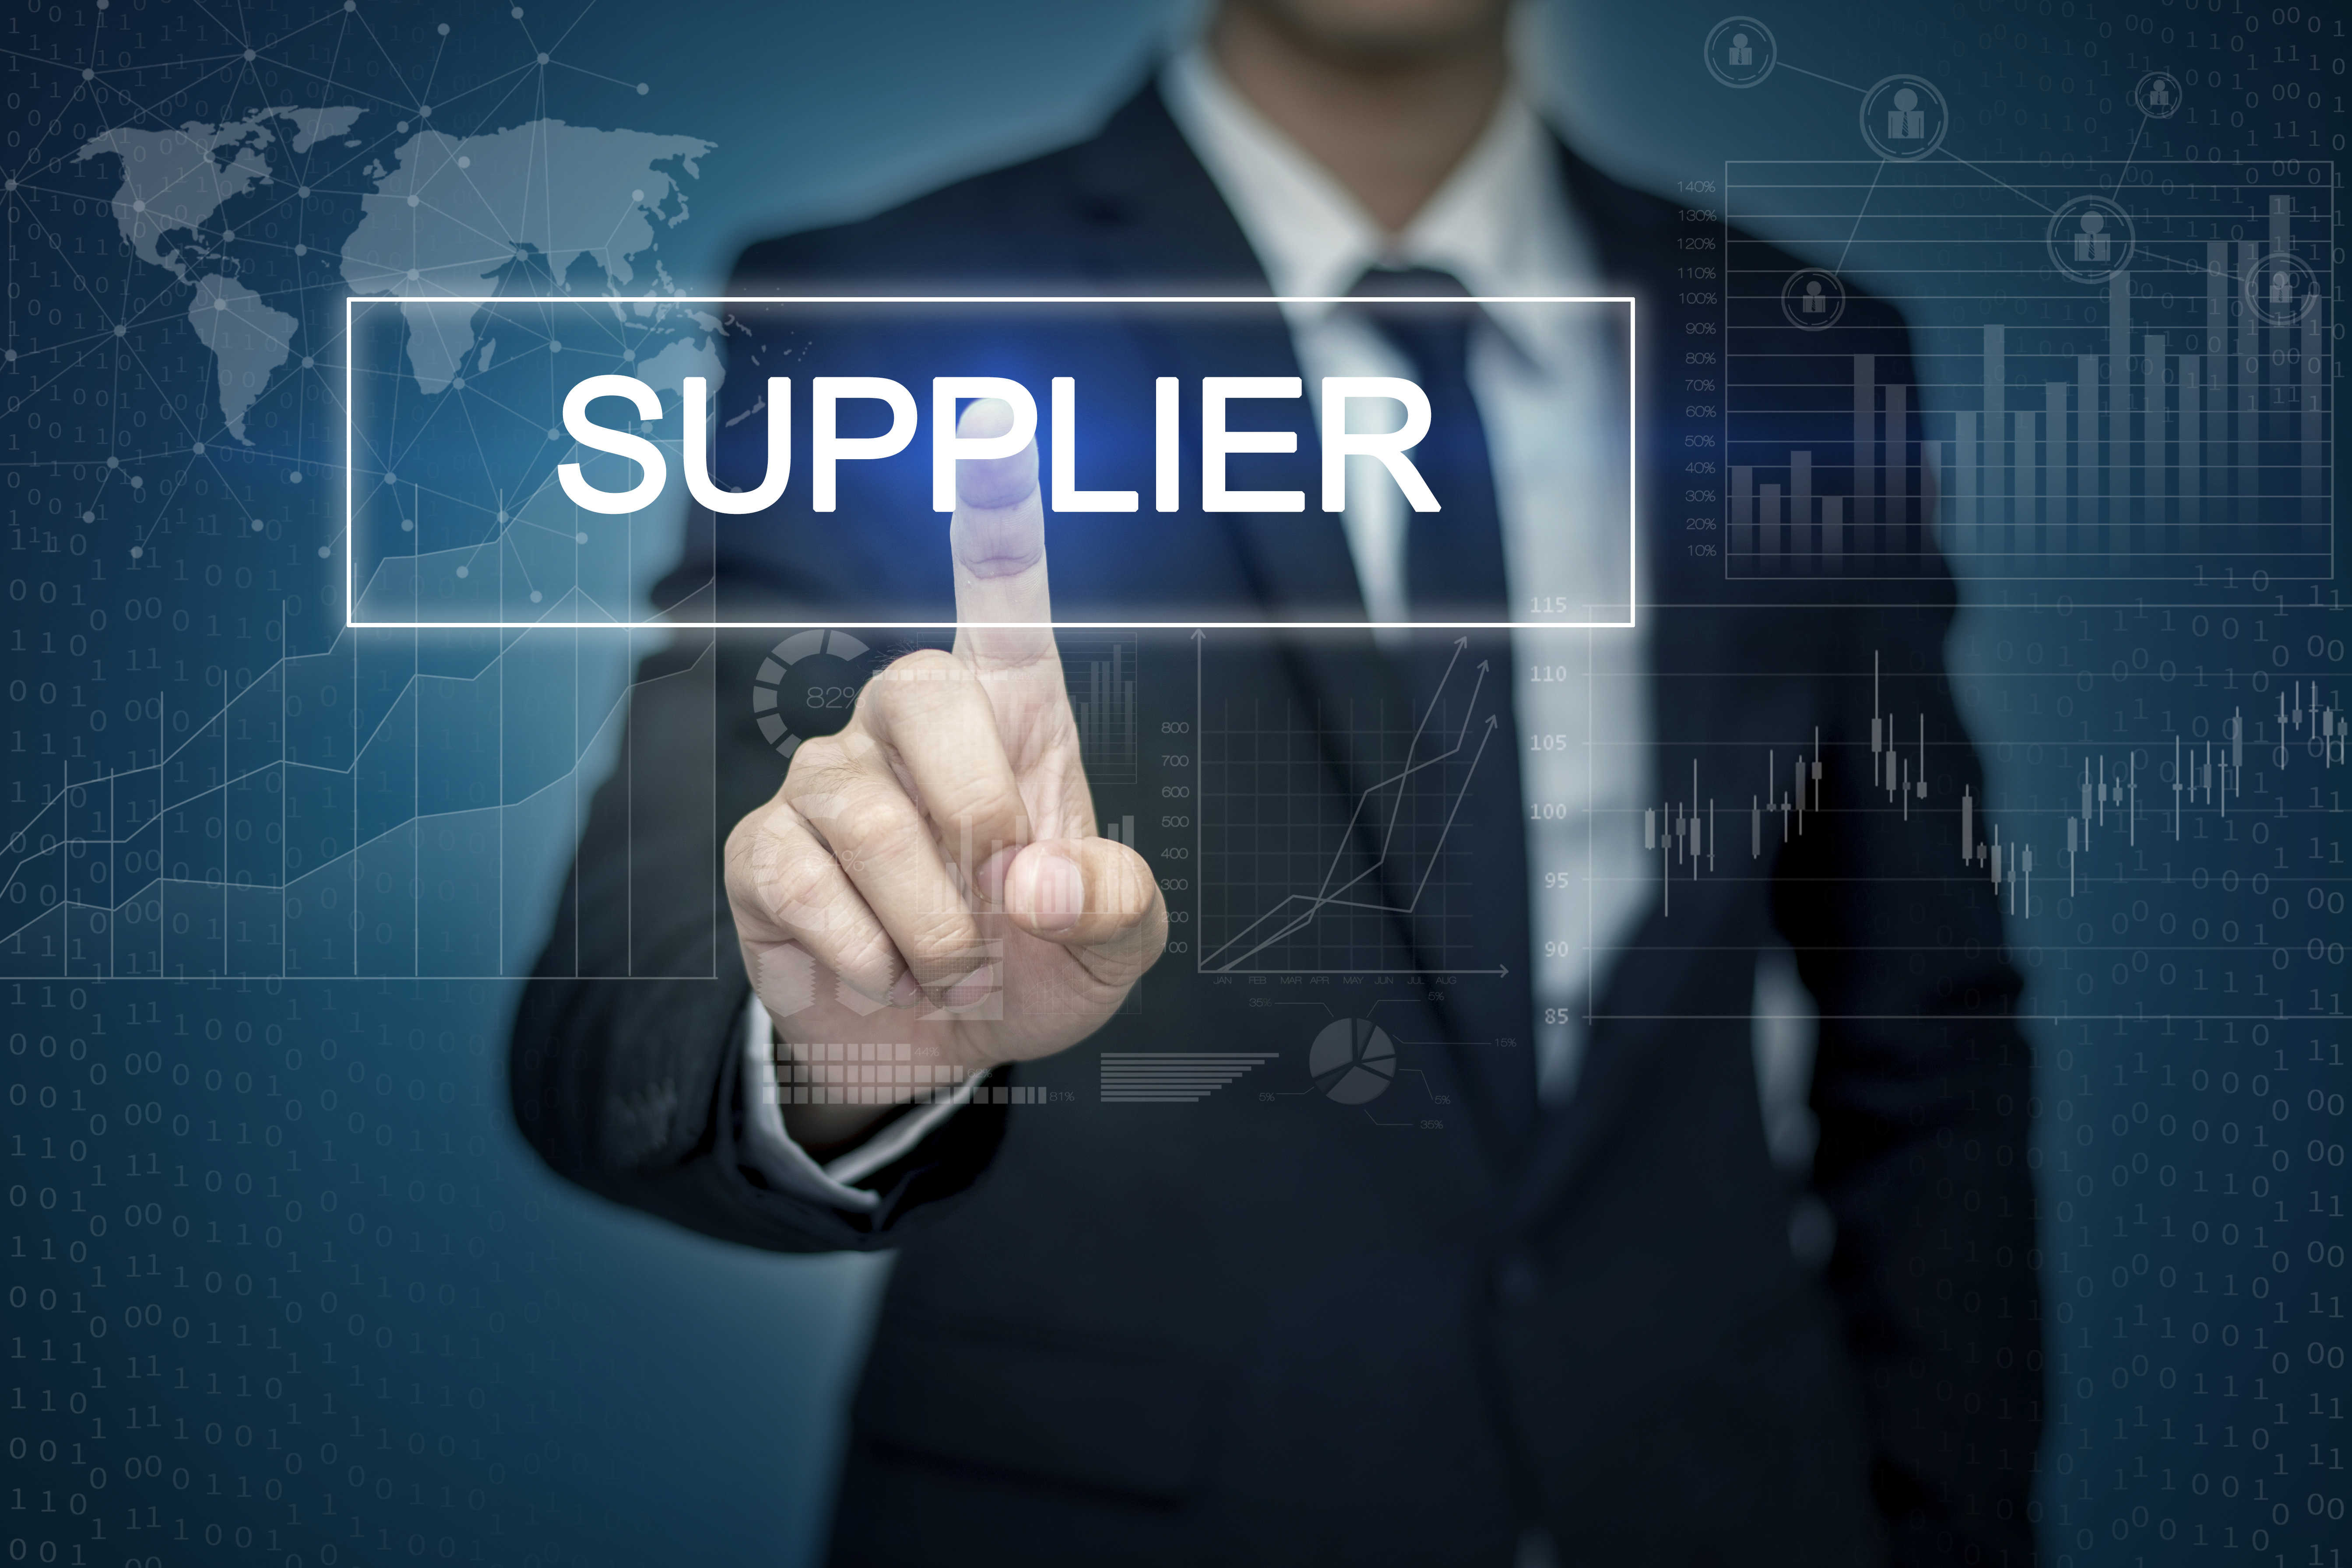 Adobe Stock photo of a man representing suppliers